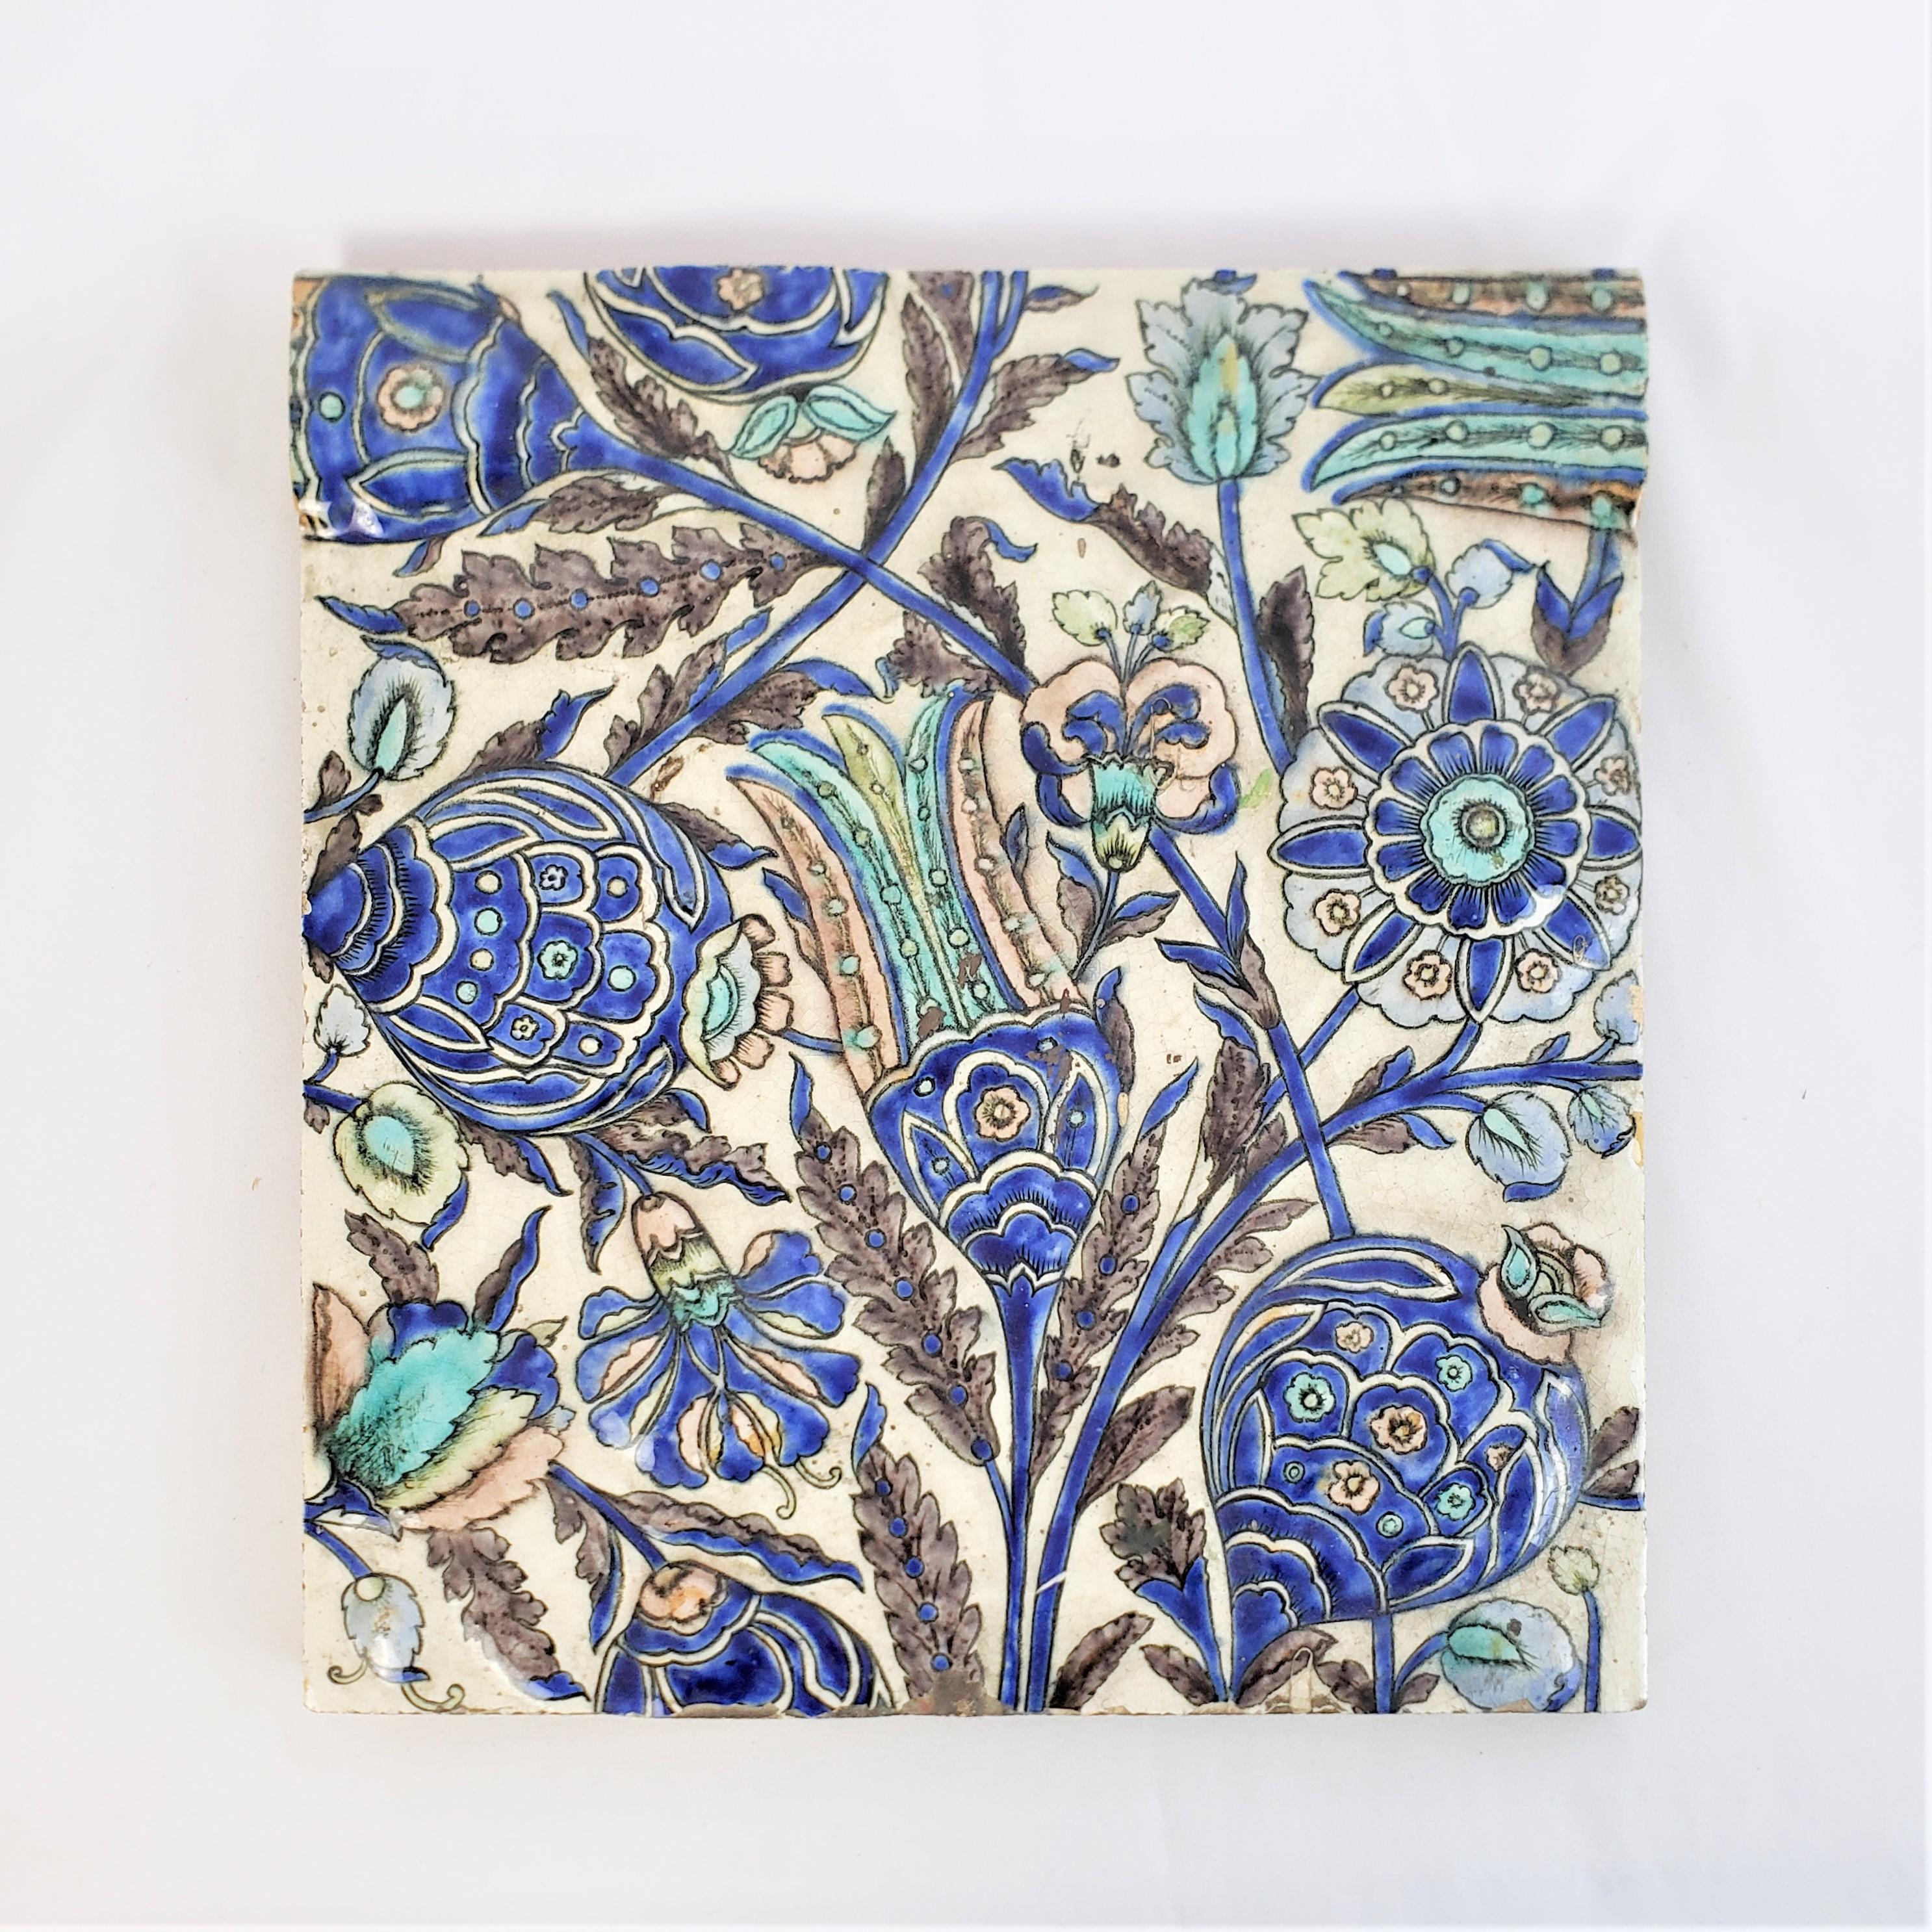 This large antique decorative tile was made by Craven, Dunnil & Jackfield of England in approximately 1890 and done in a period Art Nouveau style. The tile is done with a thick pottery with a glossy cream ground on the top with a number of stylized